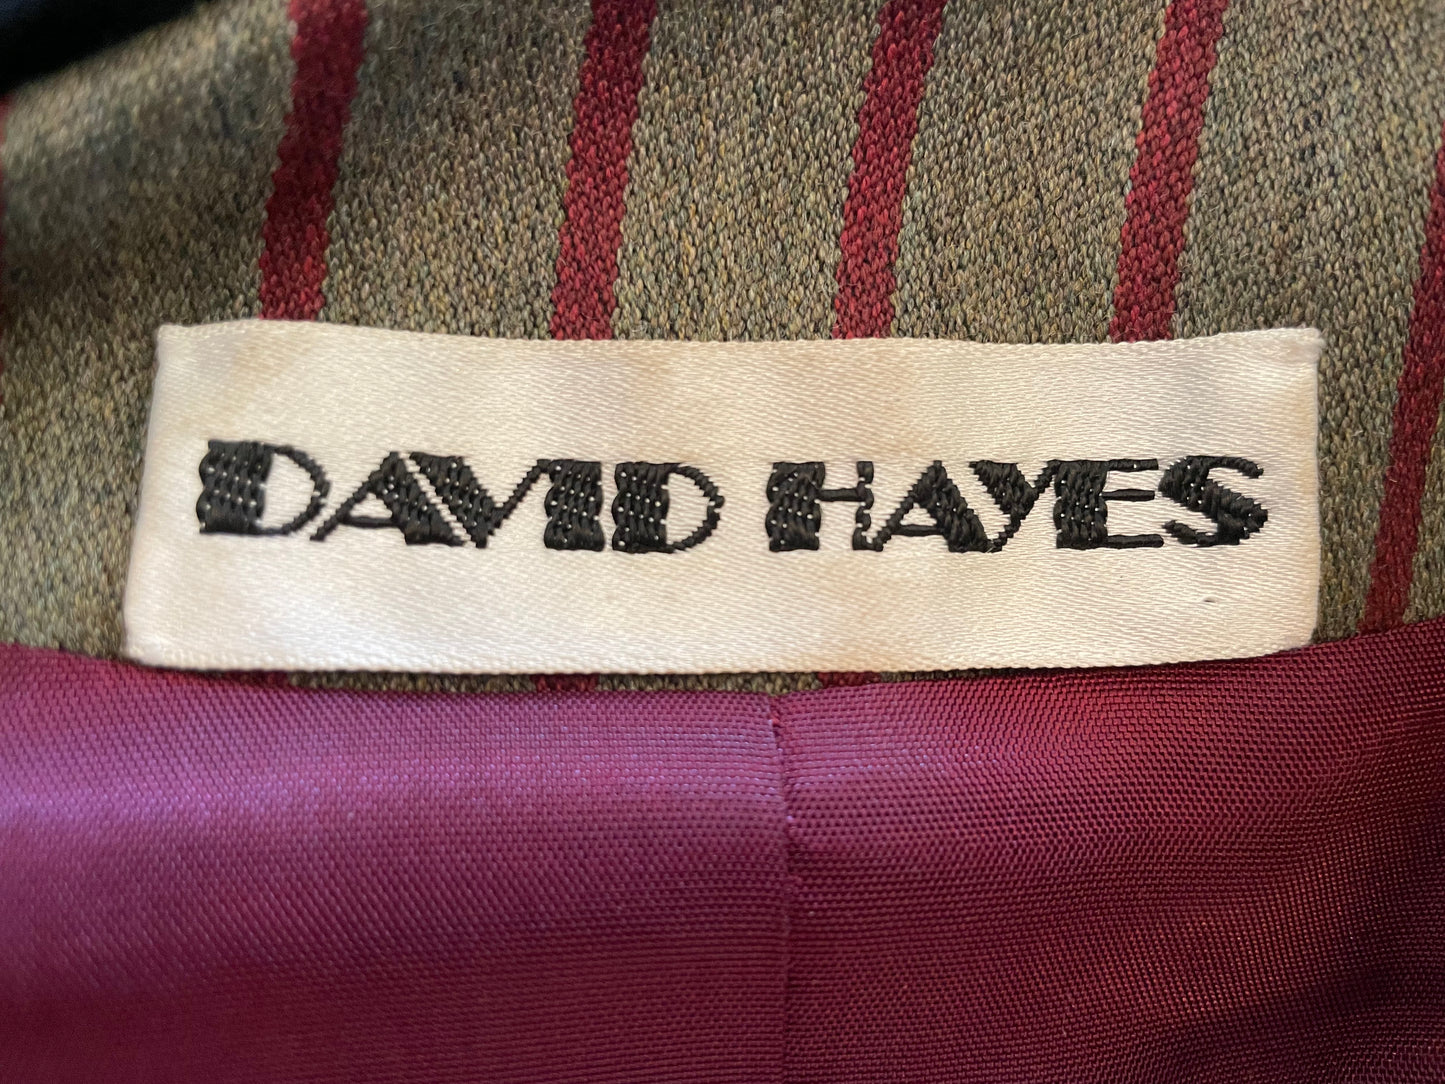 David Hayes Red Striped Suit